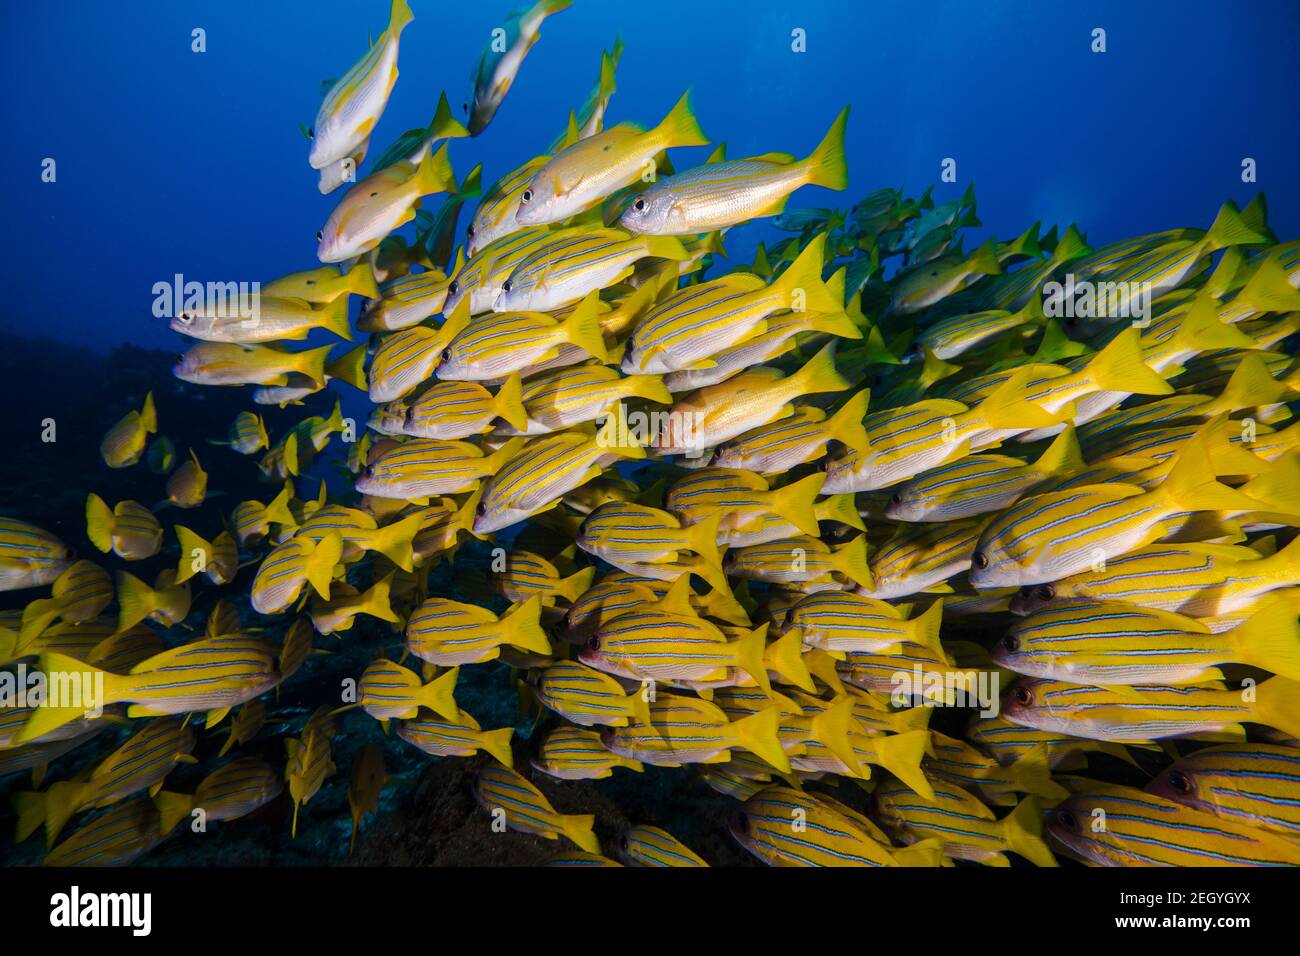 Large school of yellow Bluebanded snapper fish (Bluelined snapper) swimming away closeup of group Stock Photo